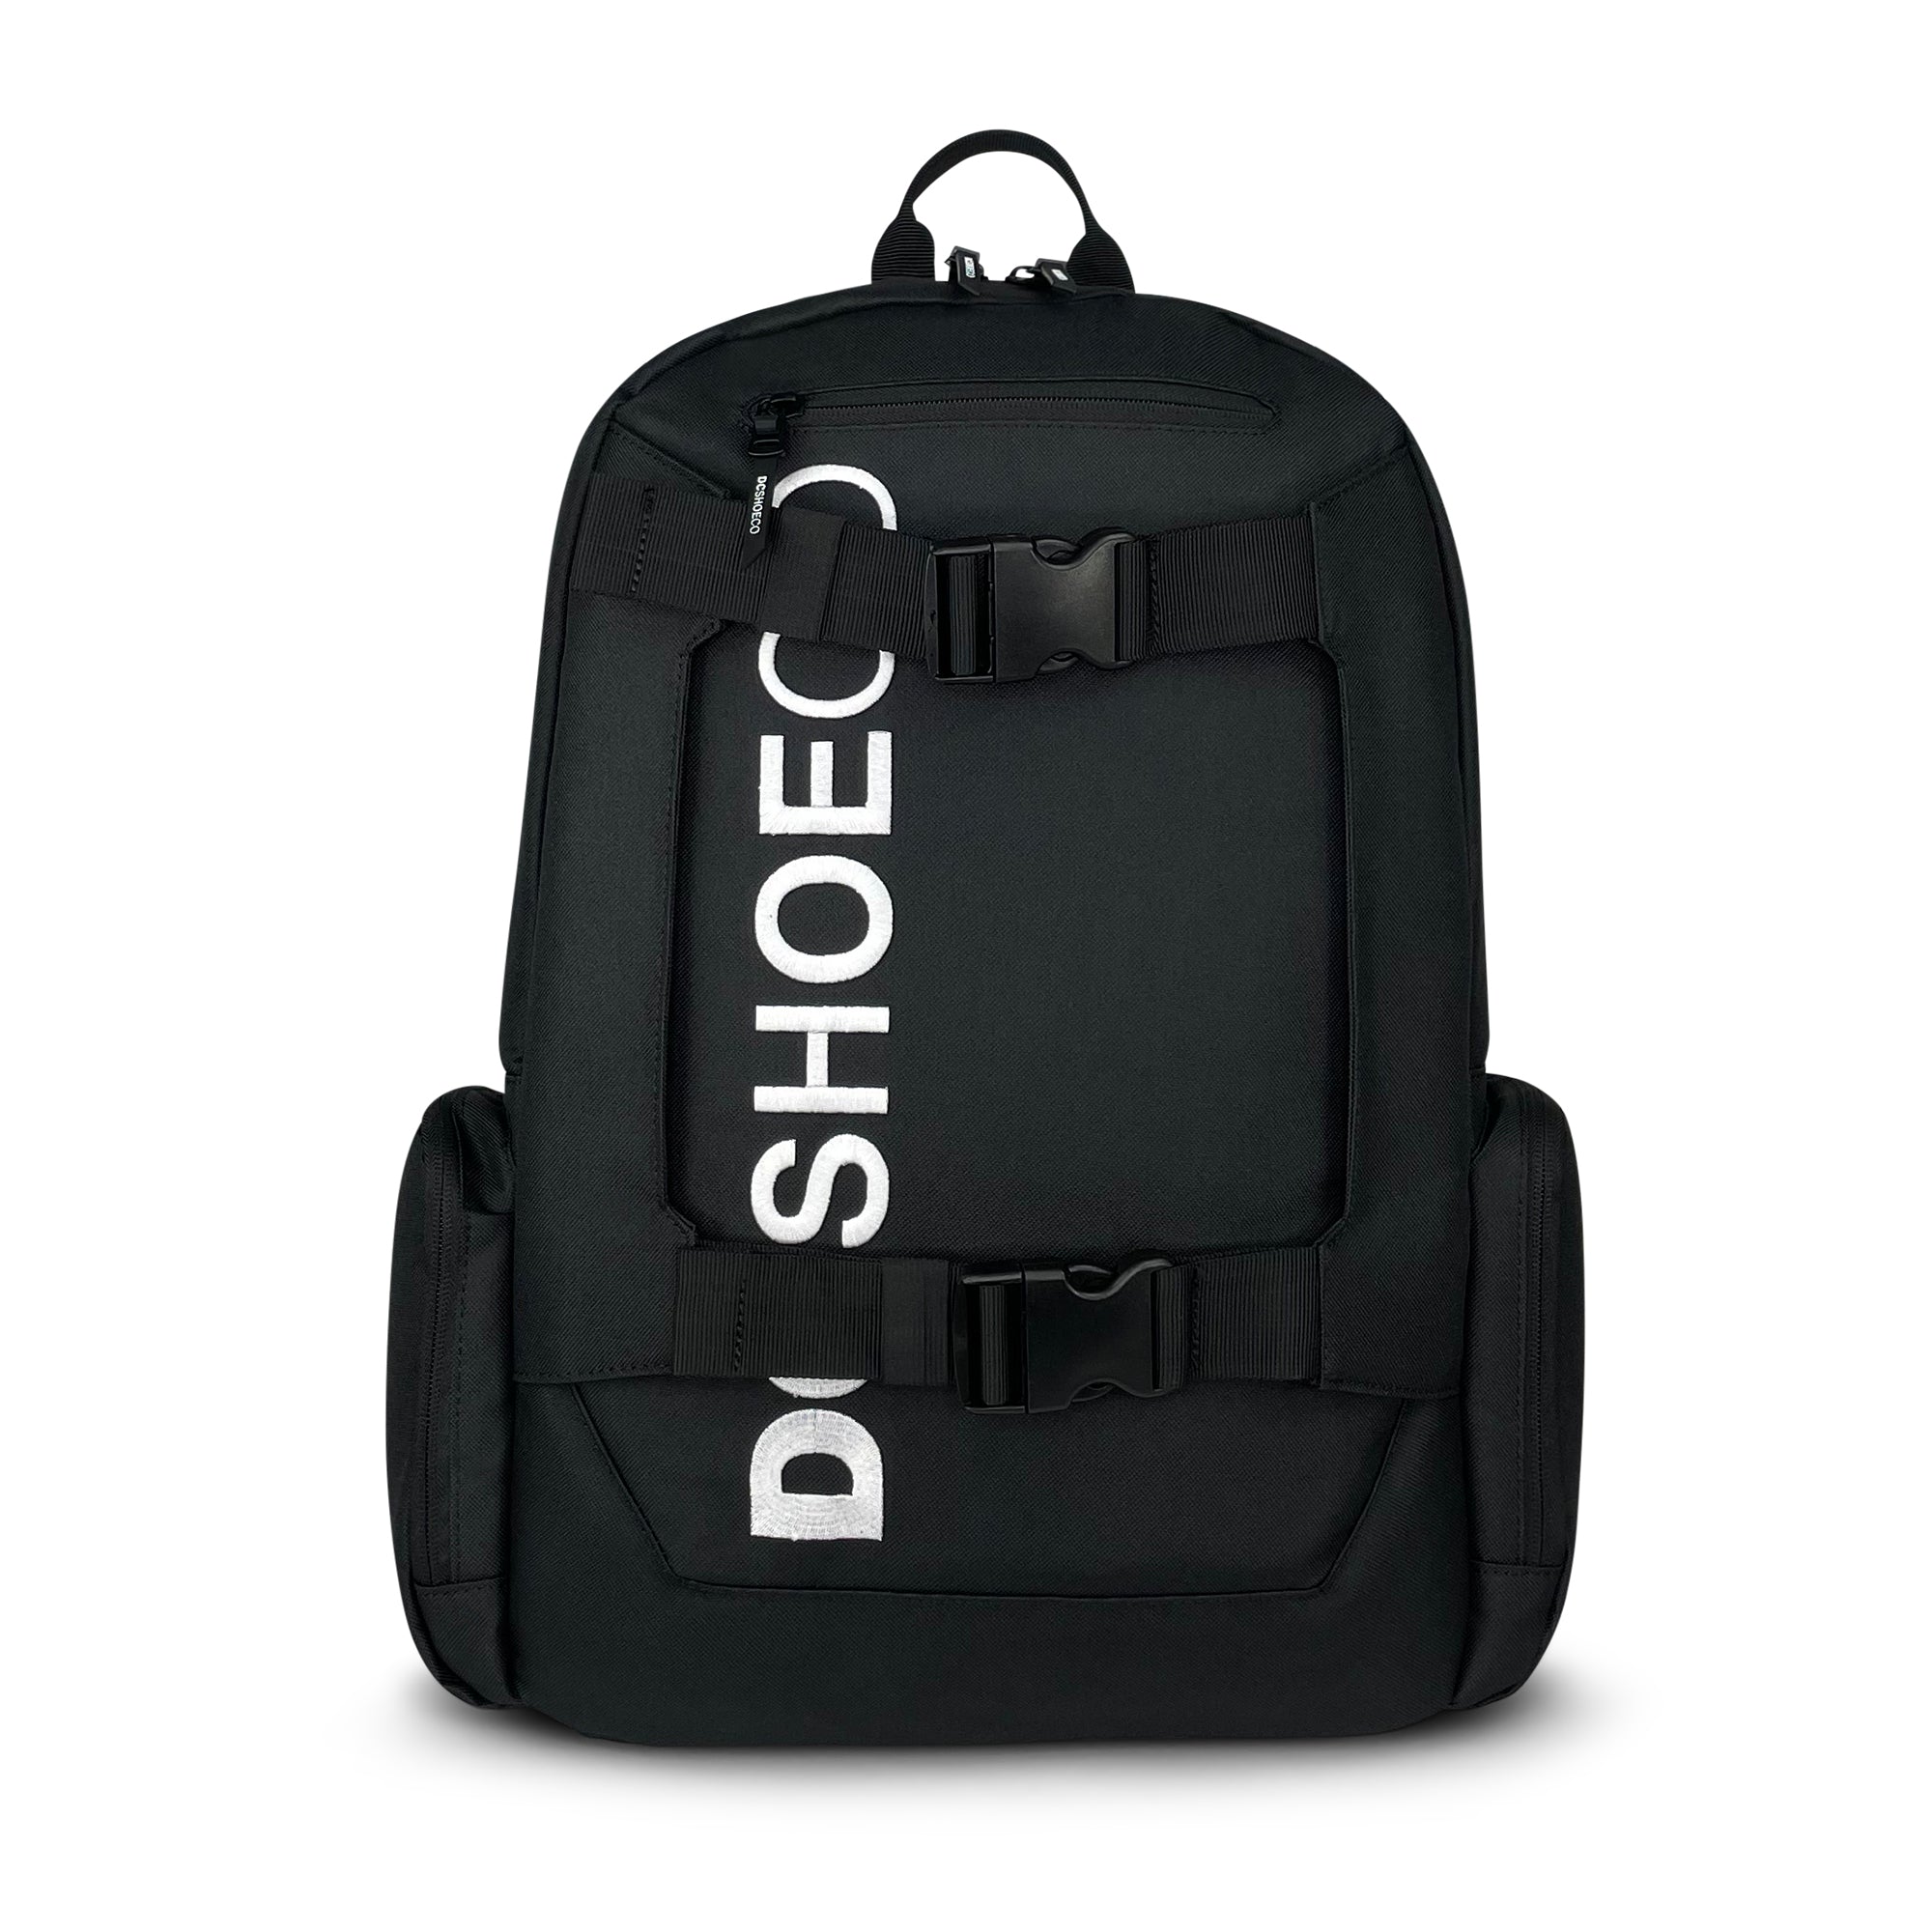 Dc Shoes Wolfbred Iii Backpack - Black | SurfStitch